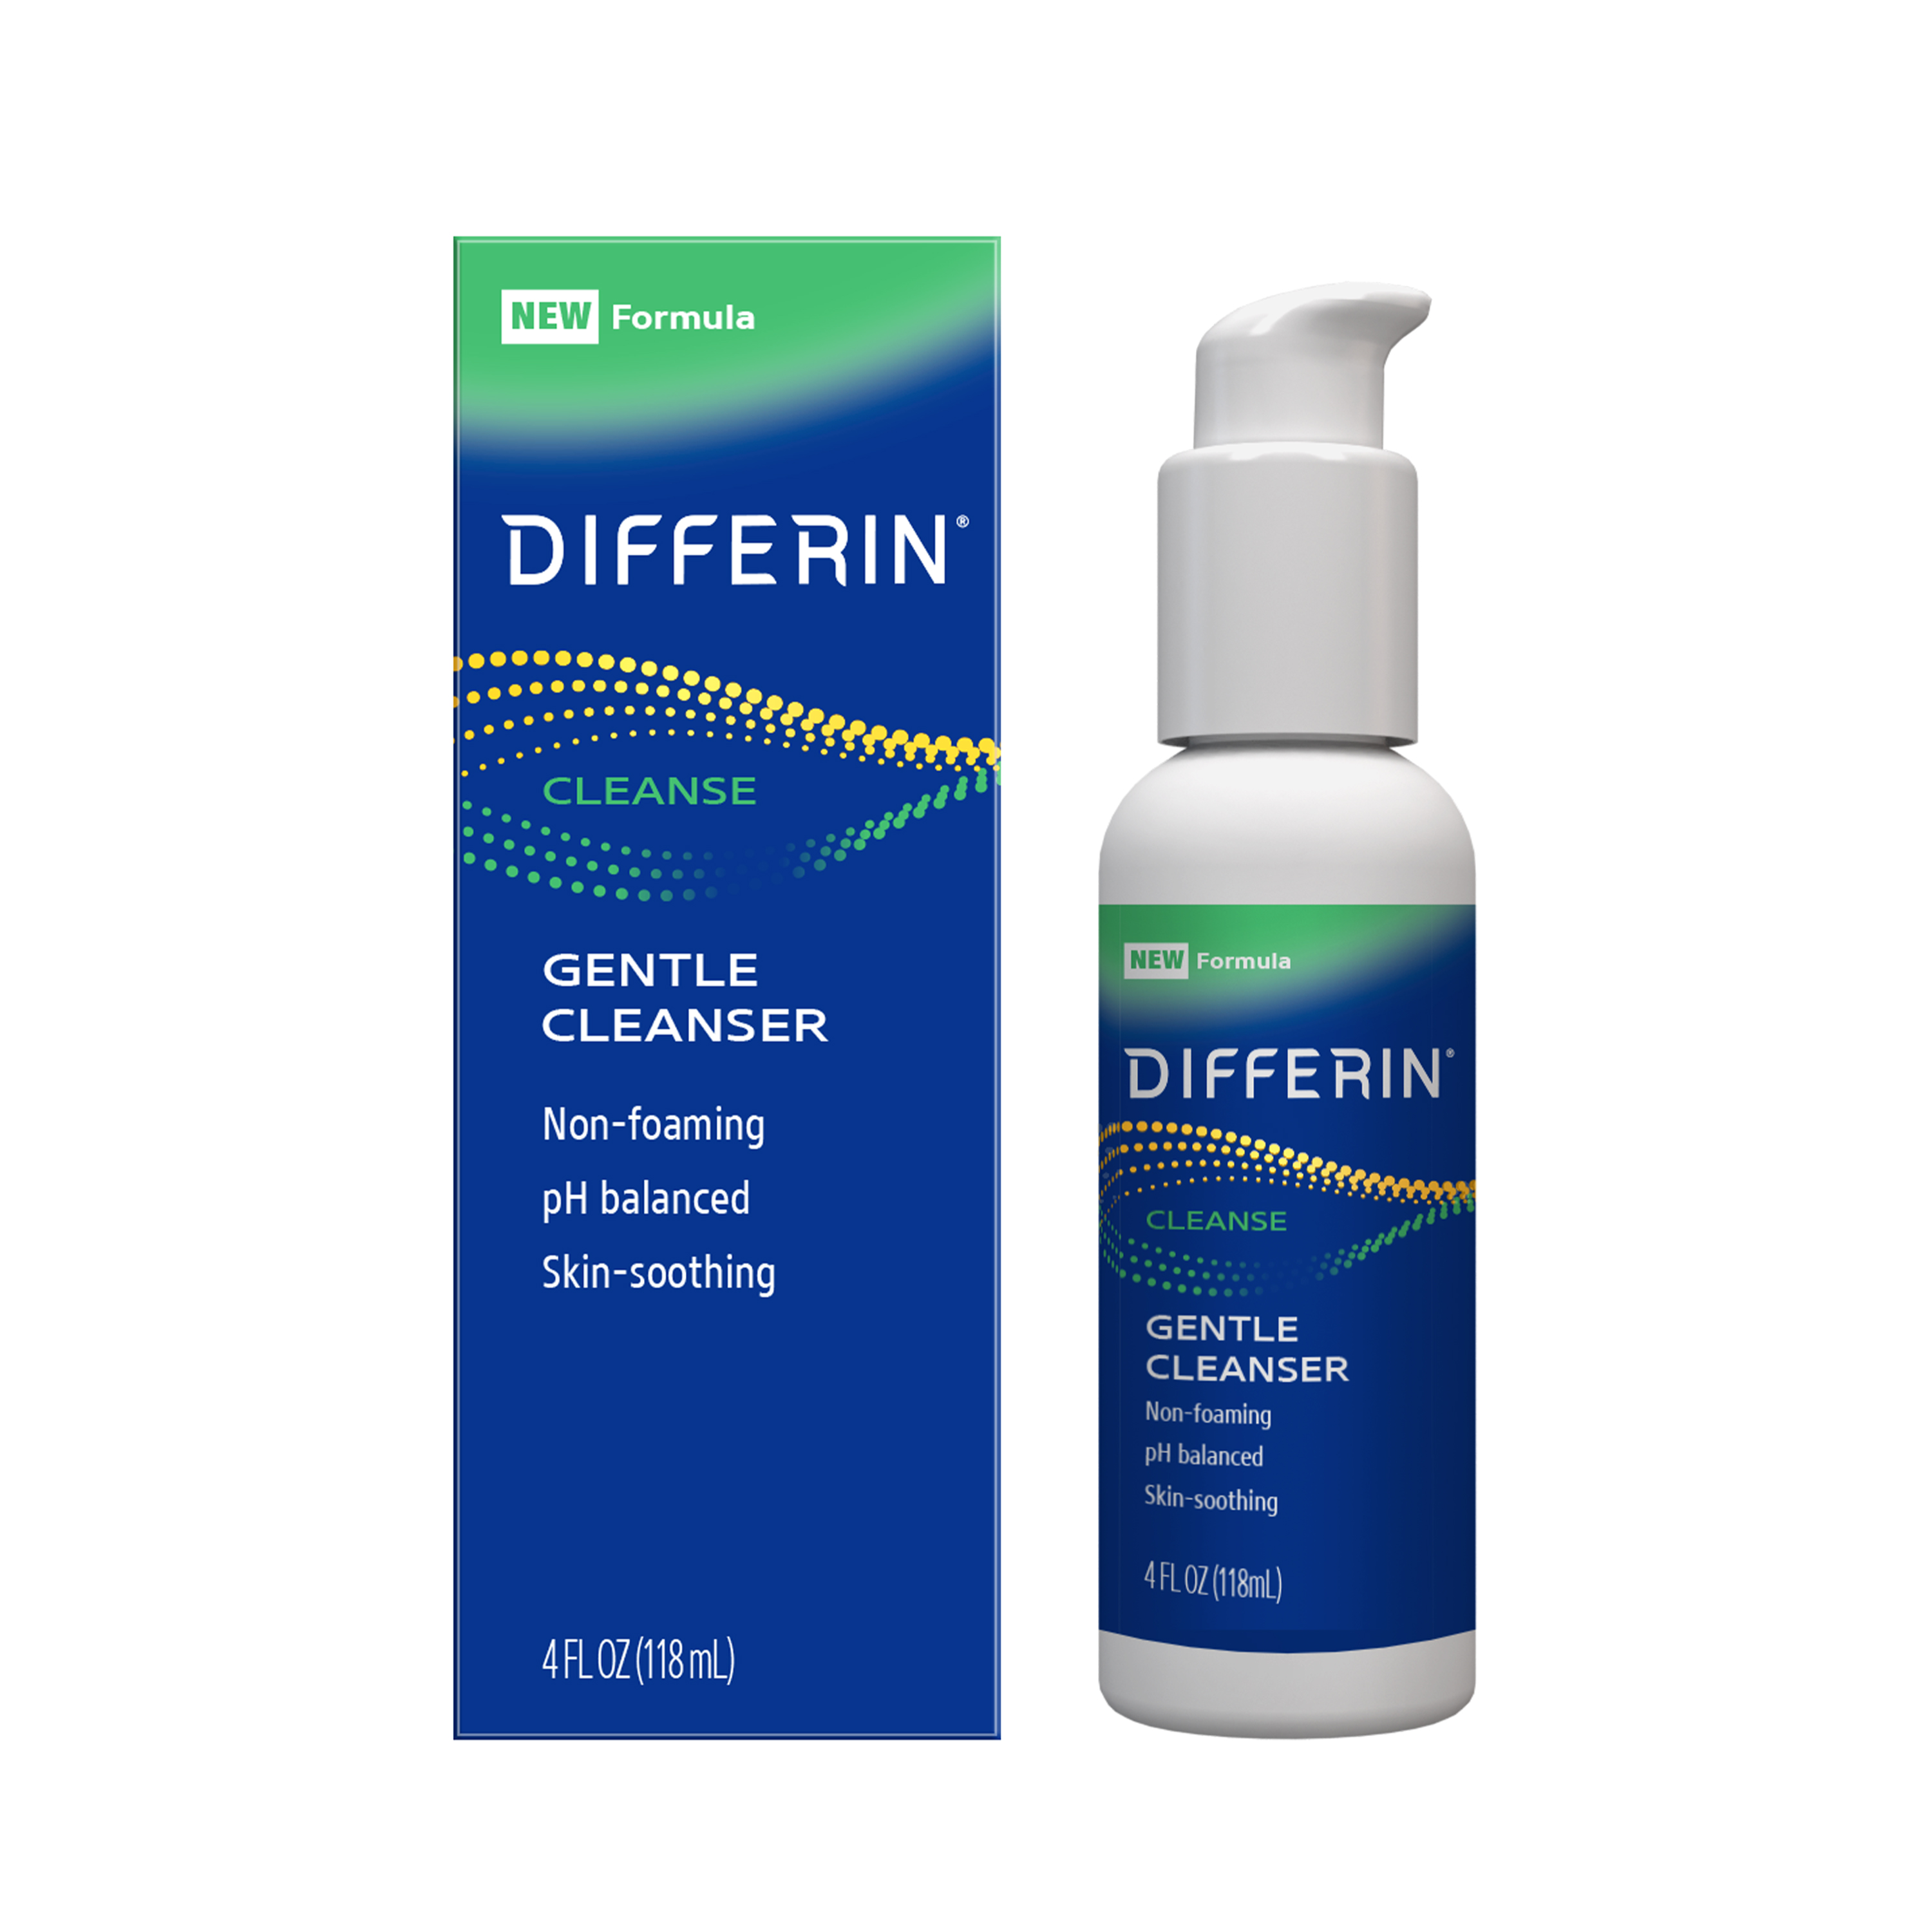 Differin Gentle Facial Cleanser, Soothing Face Wash for Acne-Prone Skin, 4 oz - image 1 of 7